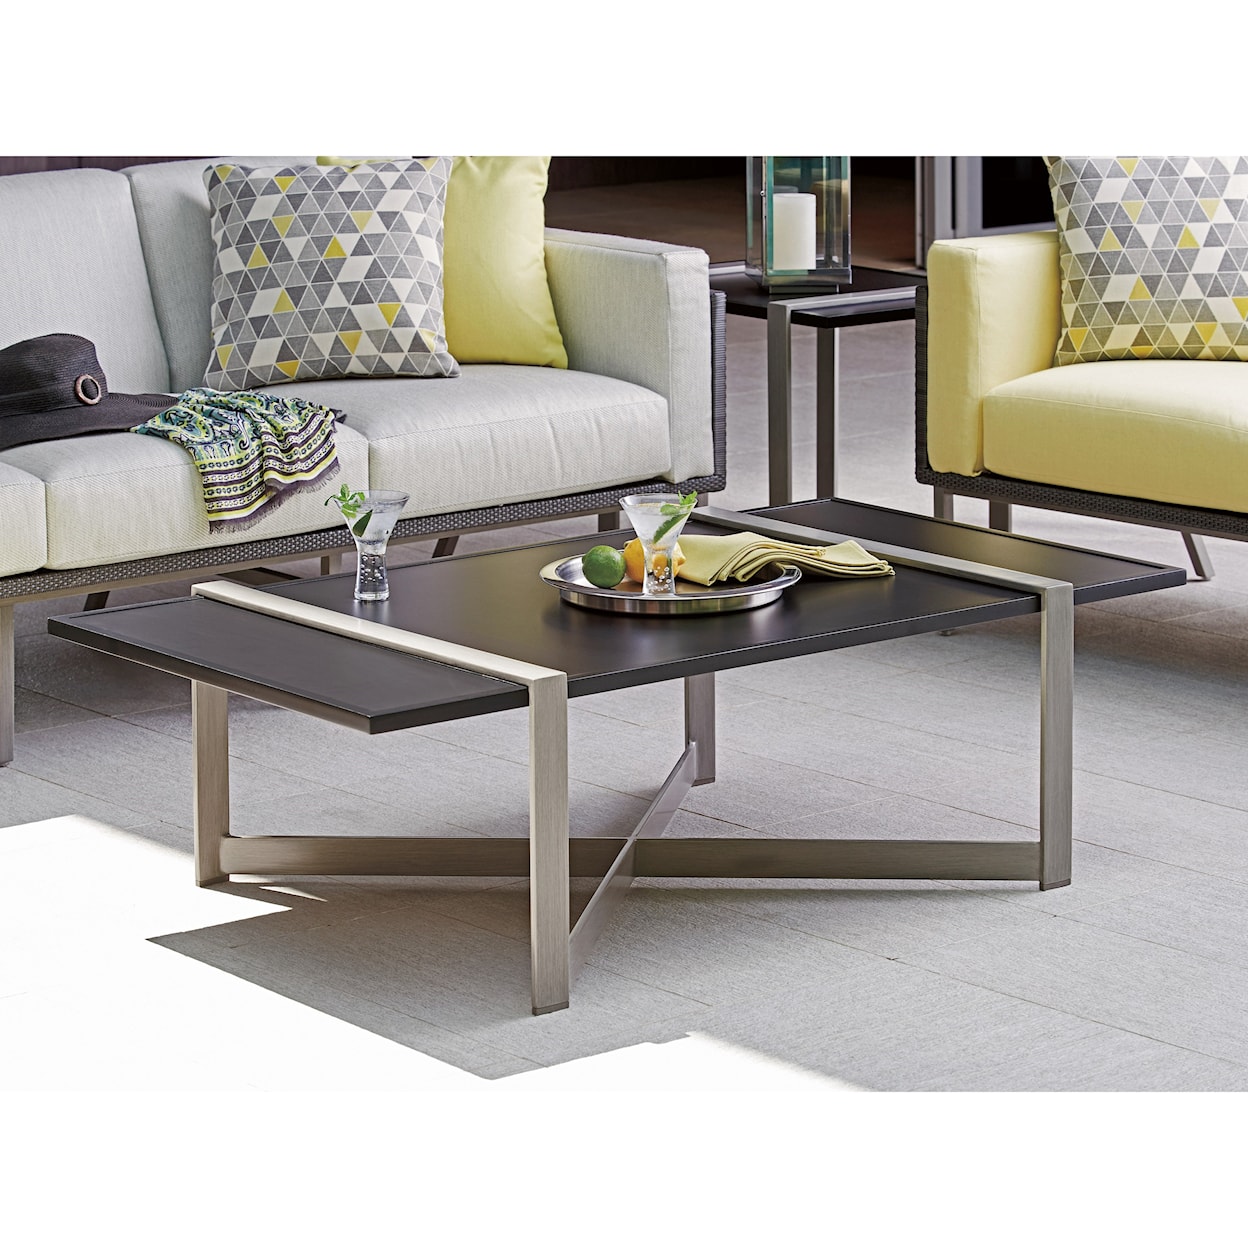 Tommy Bahama Outdoor Living Del Mar Rectangular Cocktail Table